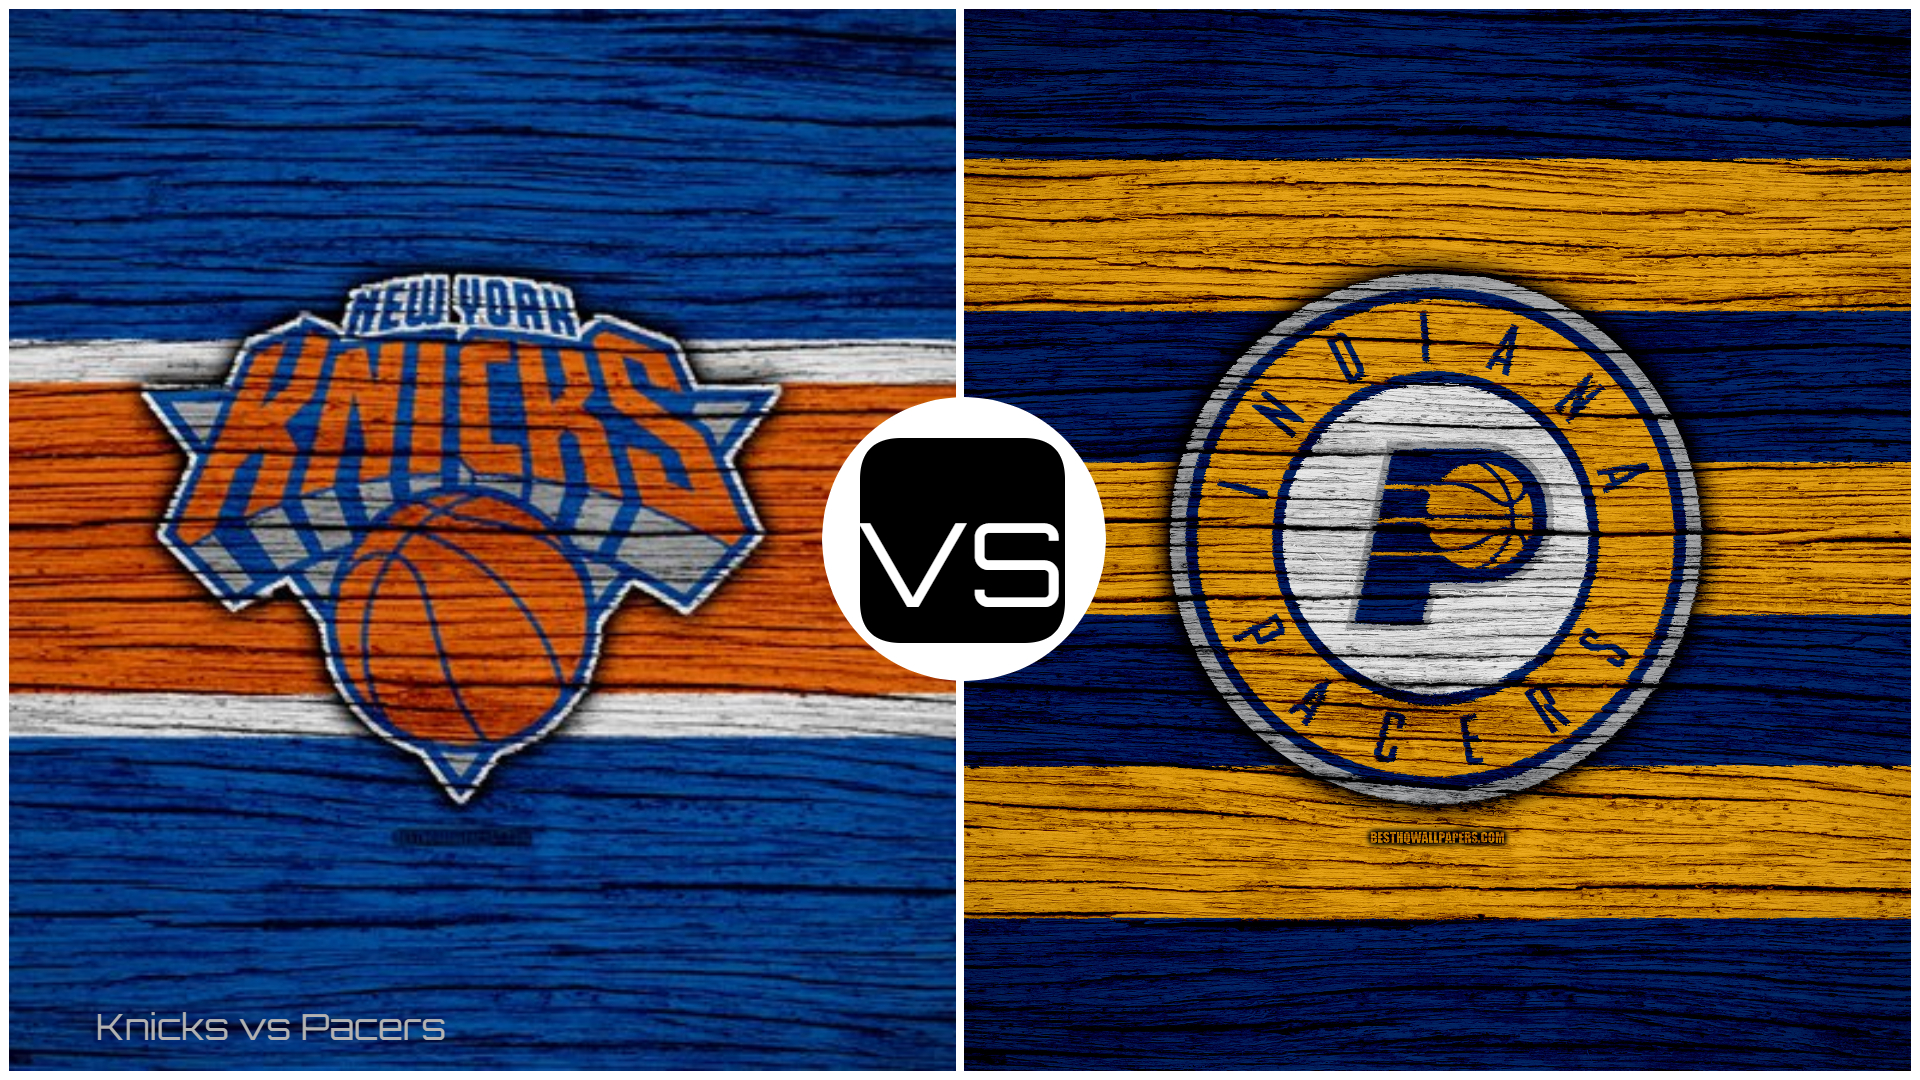 Knicks vs Pacers